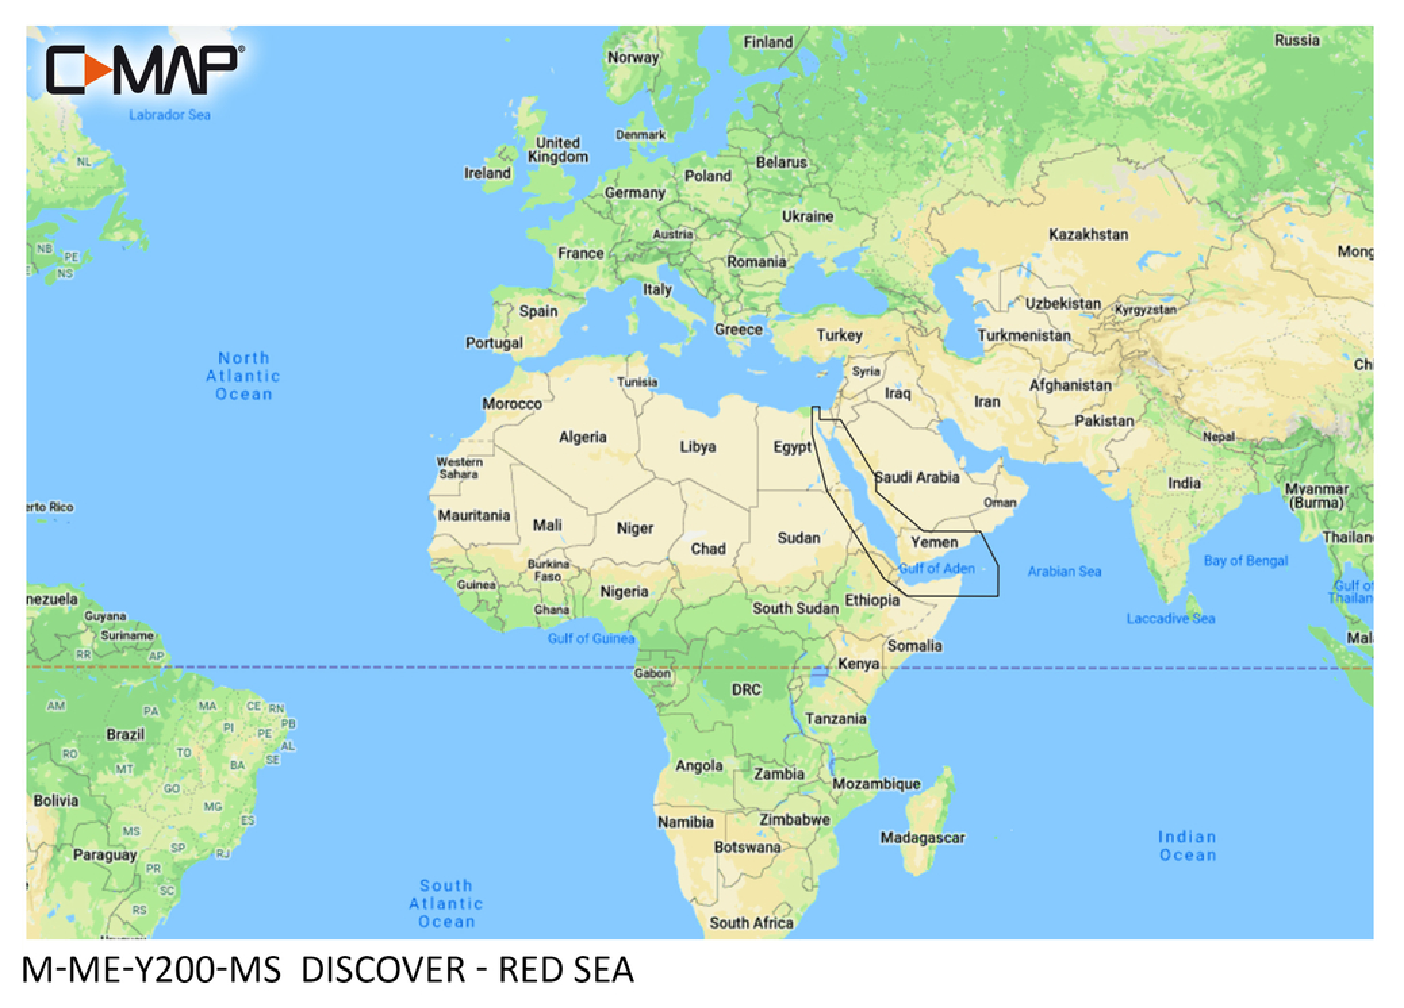 C-MAP Discover Mer Rouge M-ME-Y200